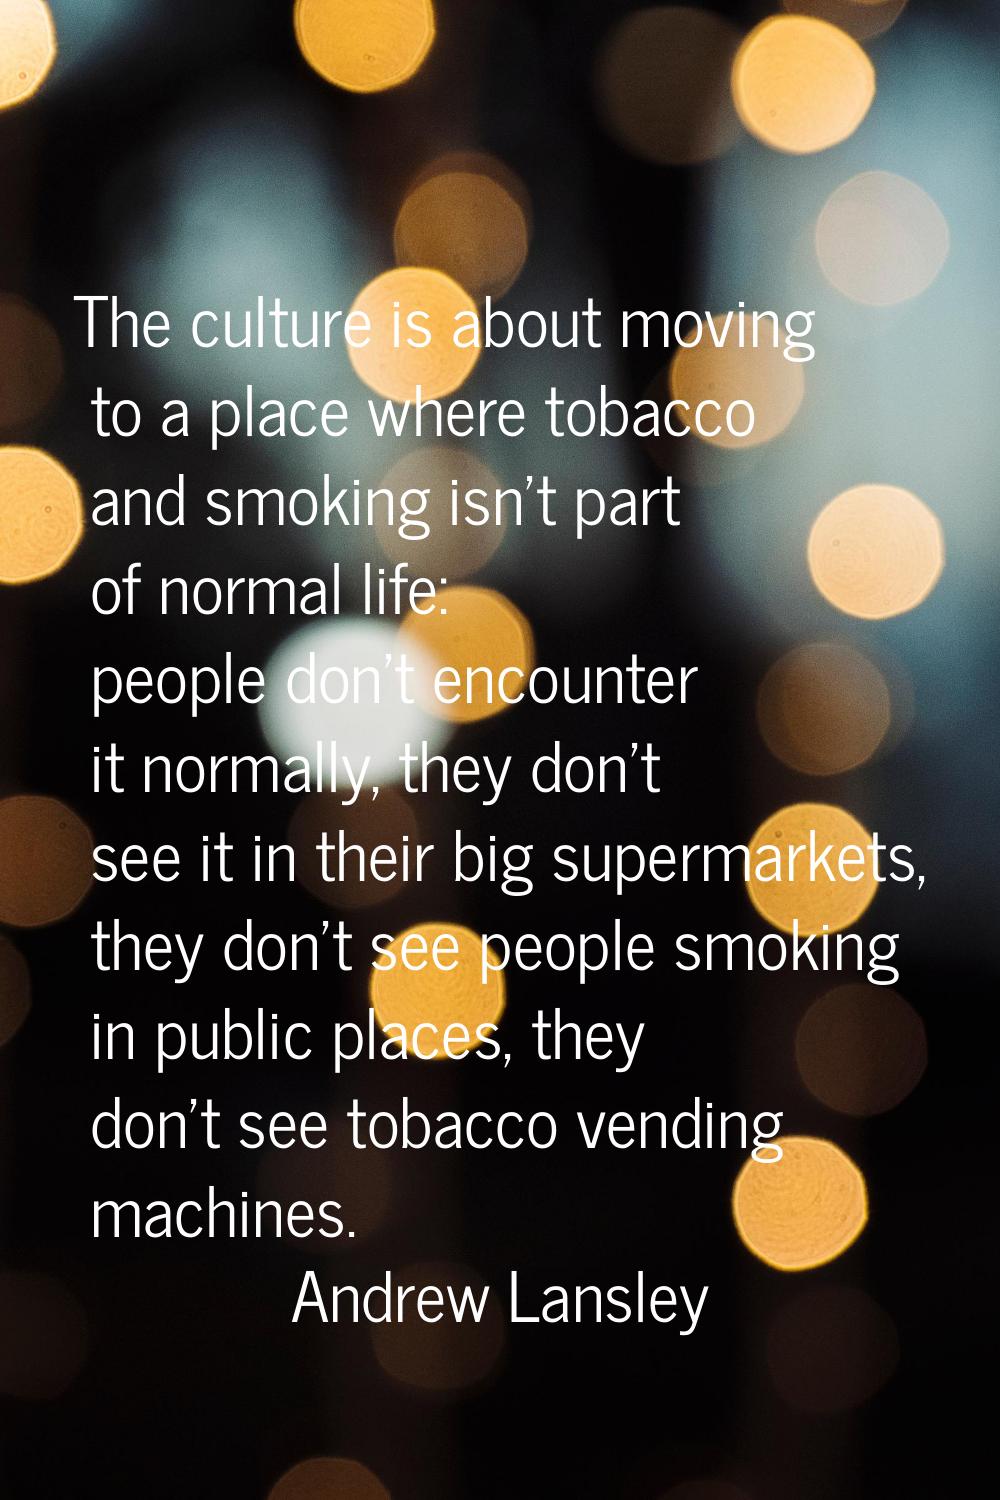 The culture is about moving to a place where tobacco and smoking isn't part of normal life: people 